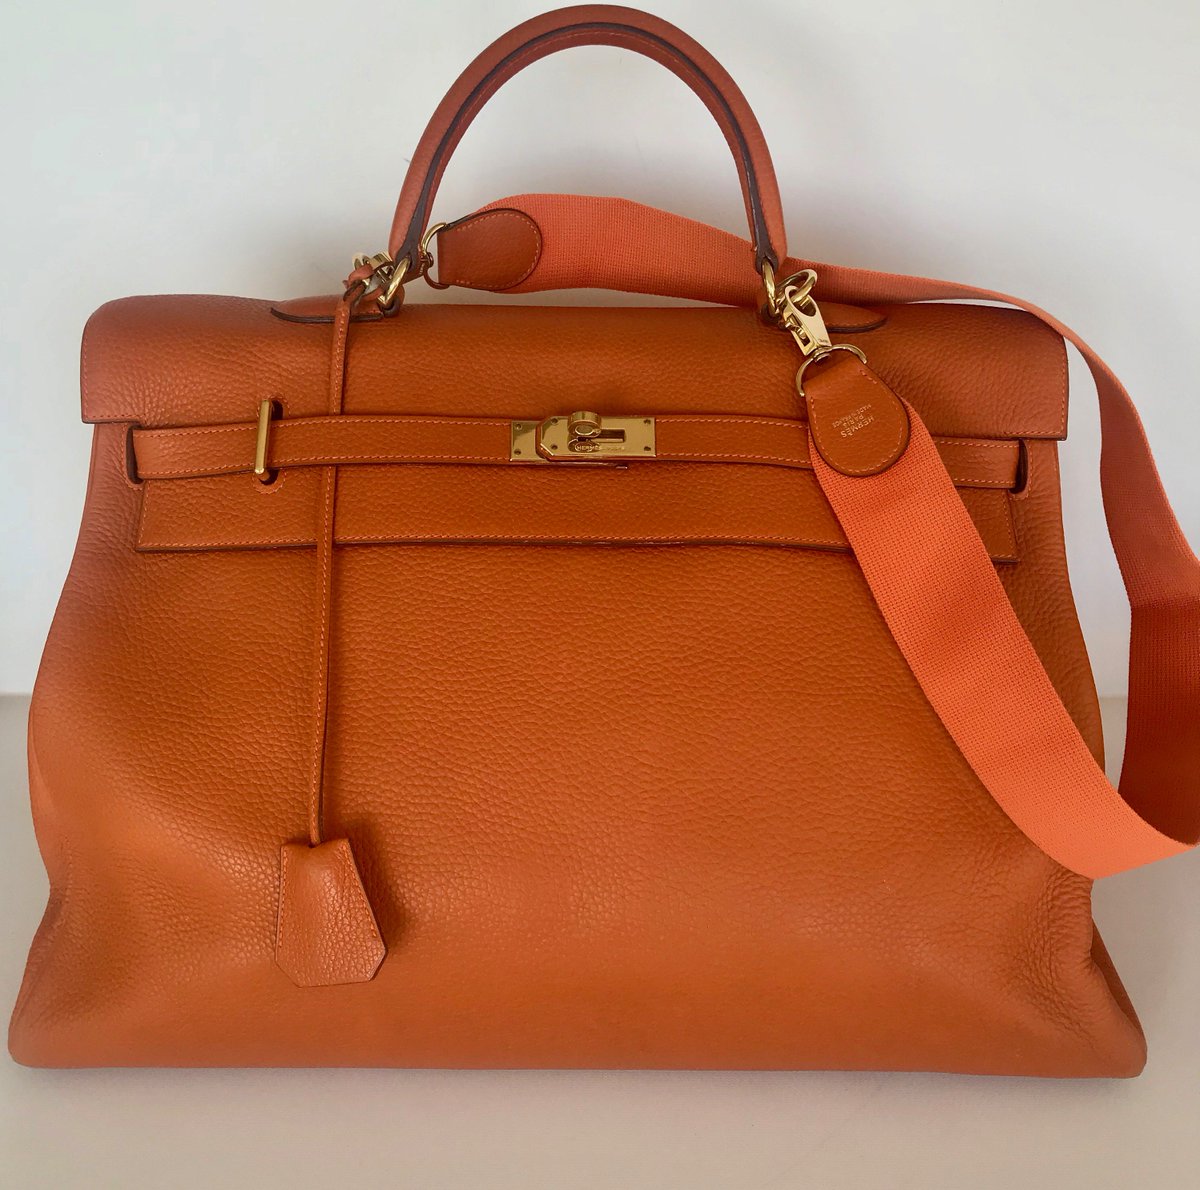 Couture Studio Online on X: HERMES KELLY 50 CM ORANGE CLEMENCE LEATHER  TRAVEL BAG WITH SHOULDER STRAP, only used a few times and in wonderful  condition.  See link to my store